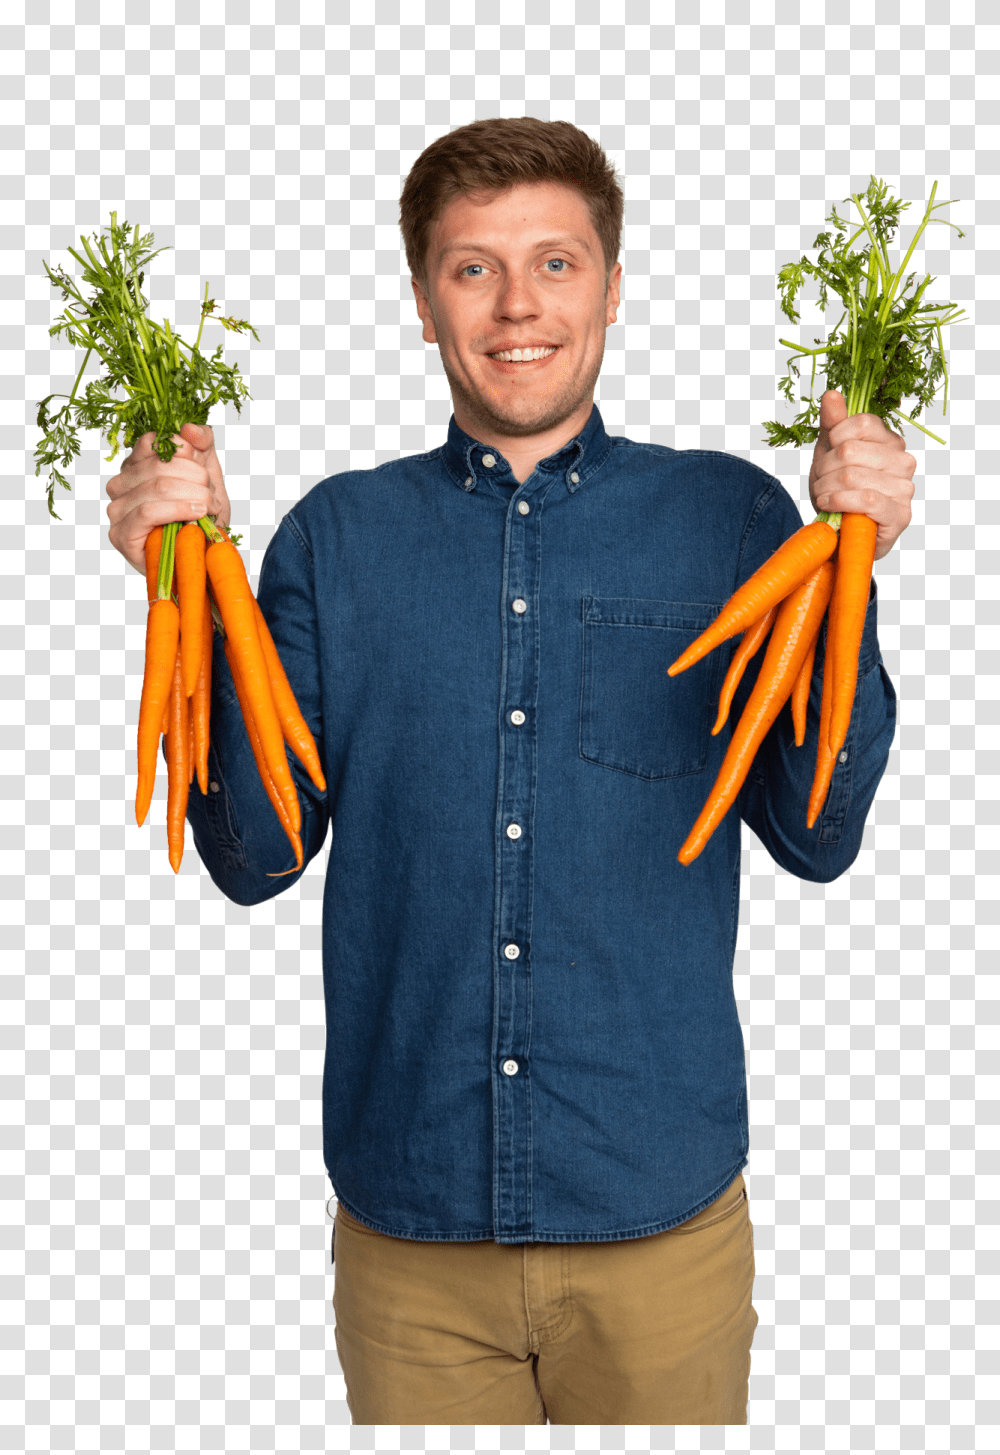 Carrot, Vegetable, Plant, Food, Person Transparent Png